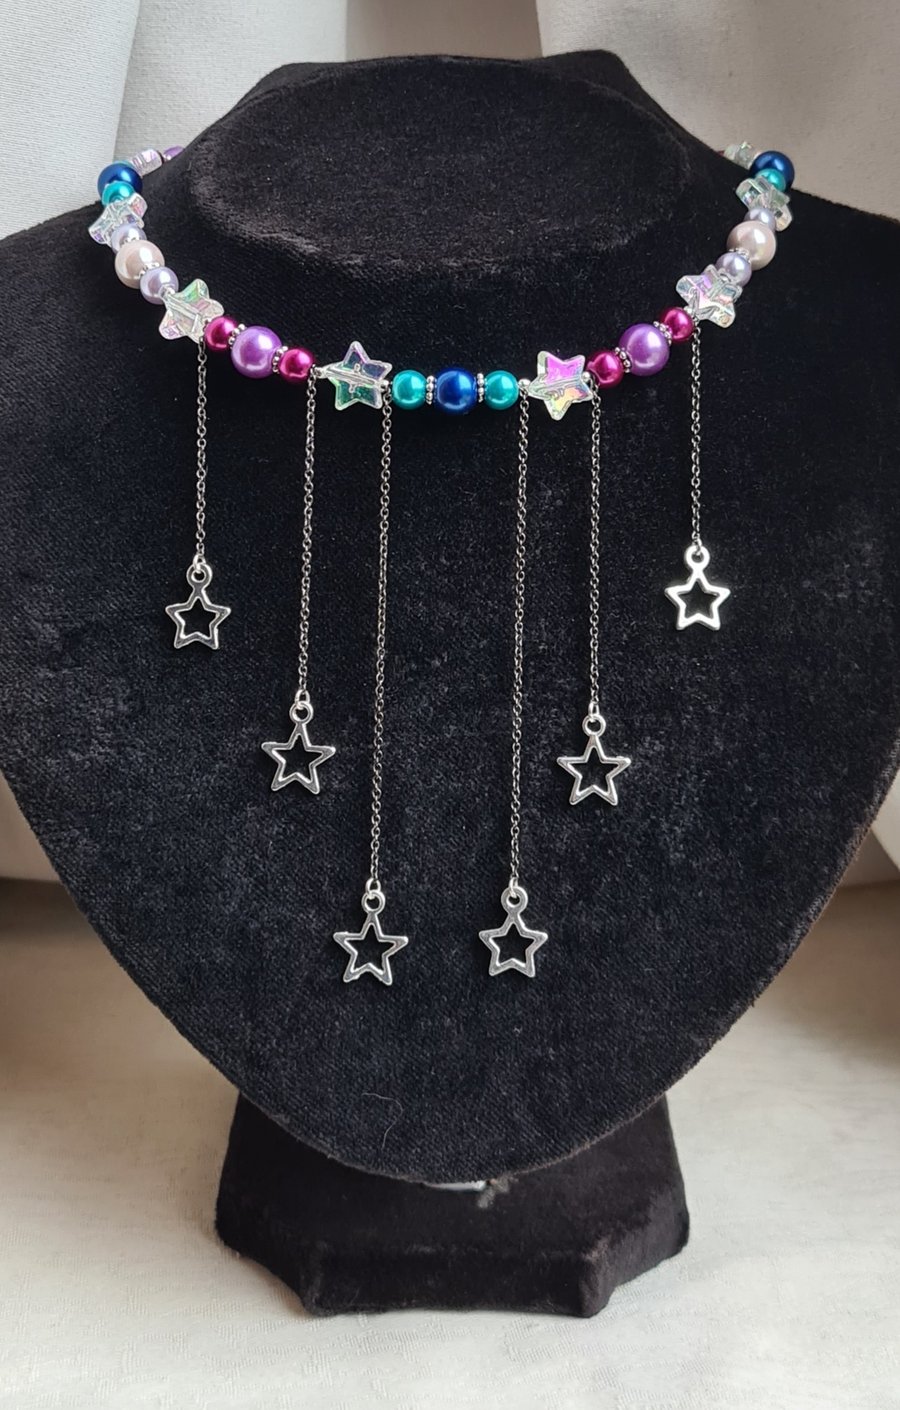 Starry Skies beaded Choker Necklace With dangly stars